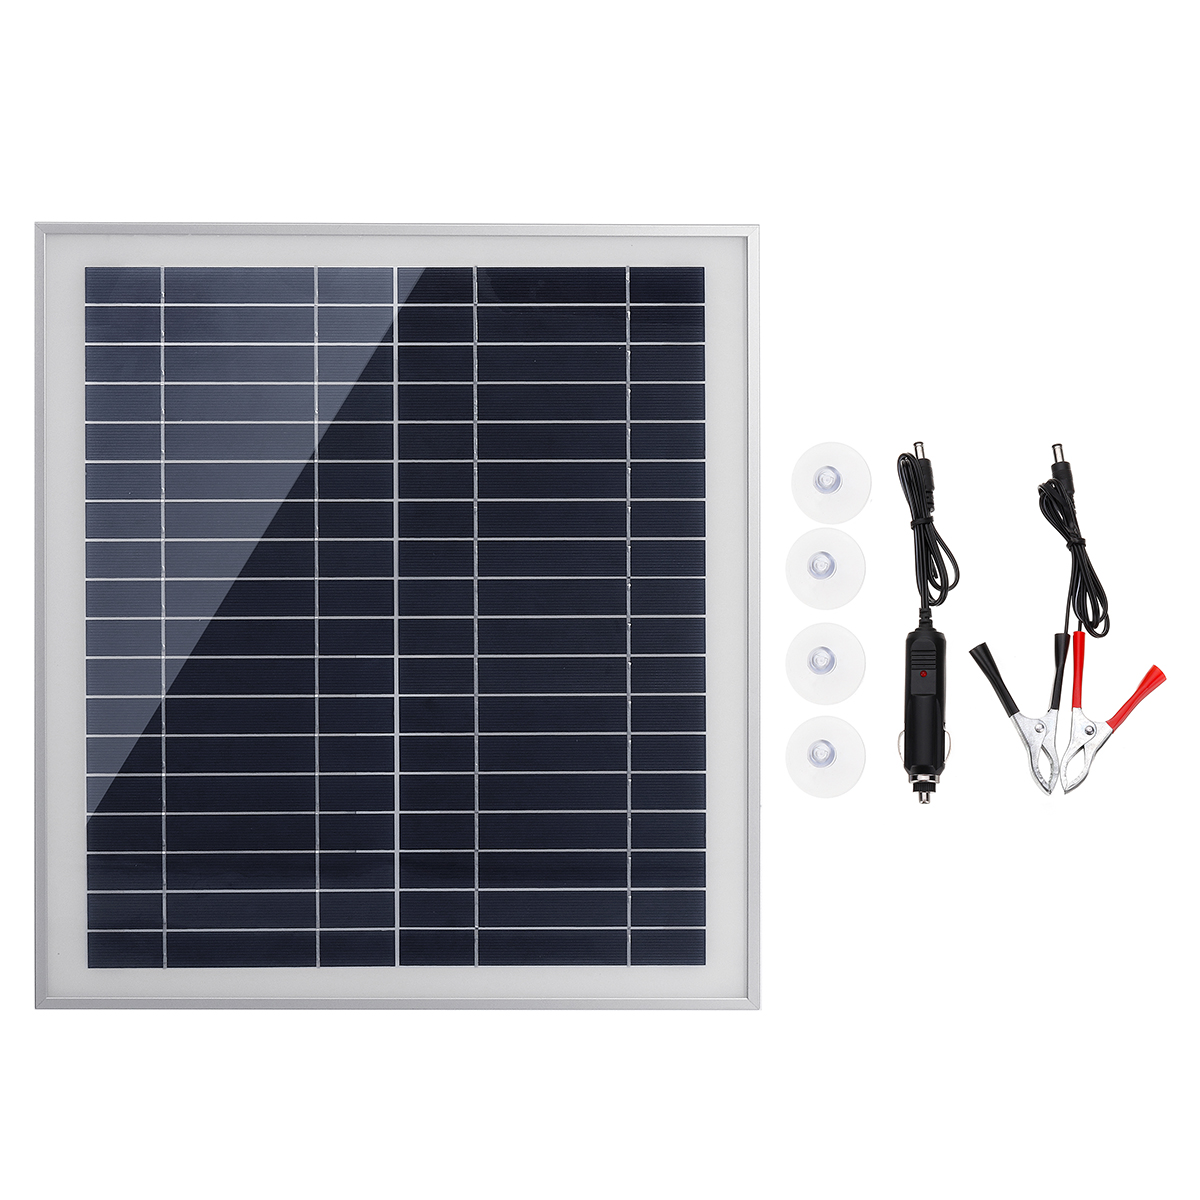 25W-Portable-Solar-Panel-Kit-DC-USB-Charging-Double-USB-Port-Suction-Cups-Camping-Traveling-1383680-2